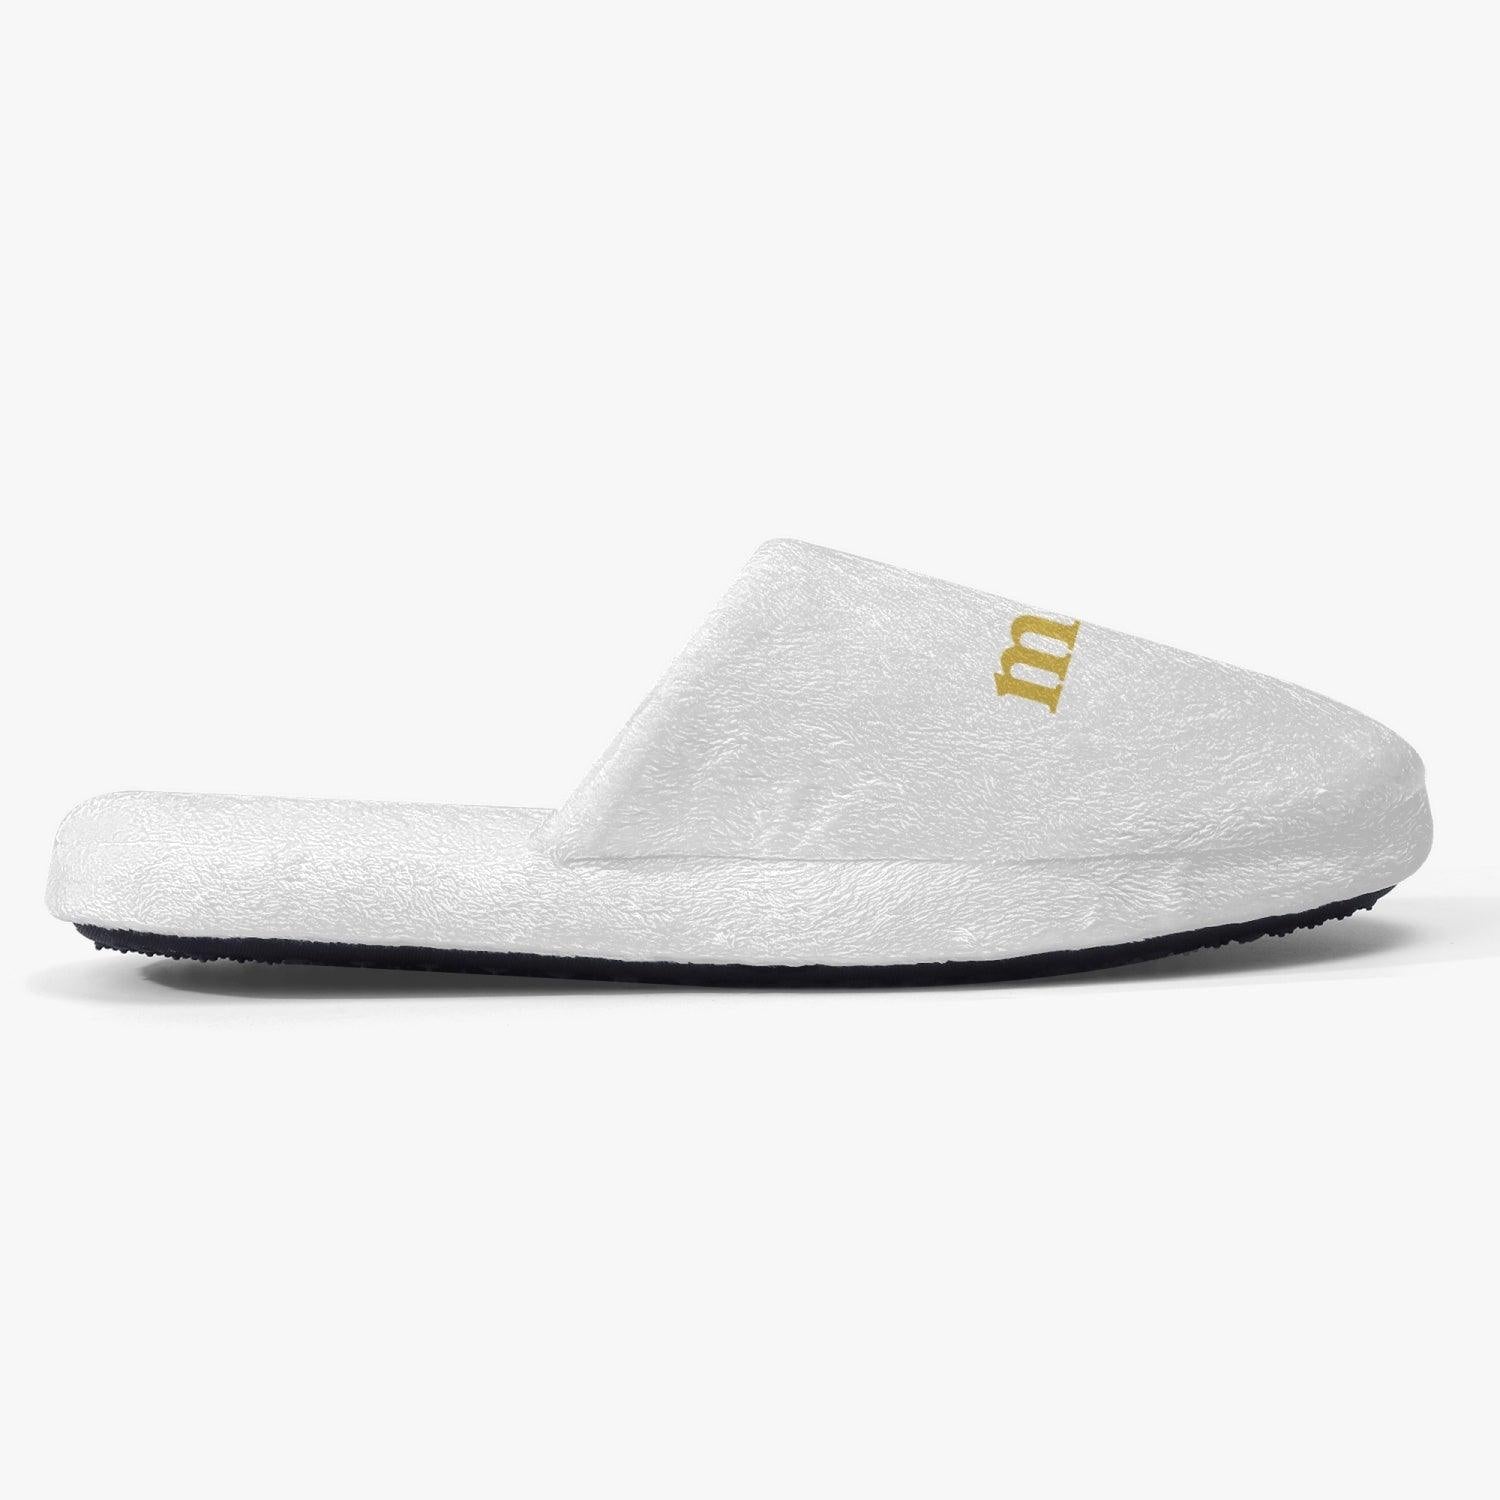 mo.be classic cotton slippers - white - mo.be